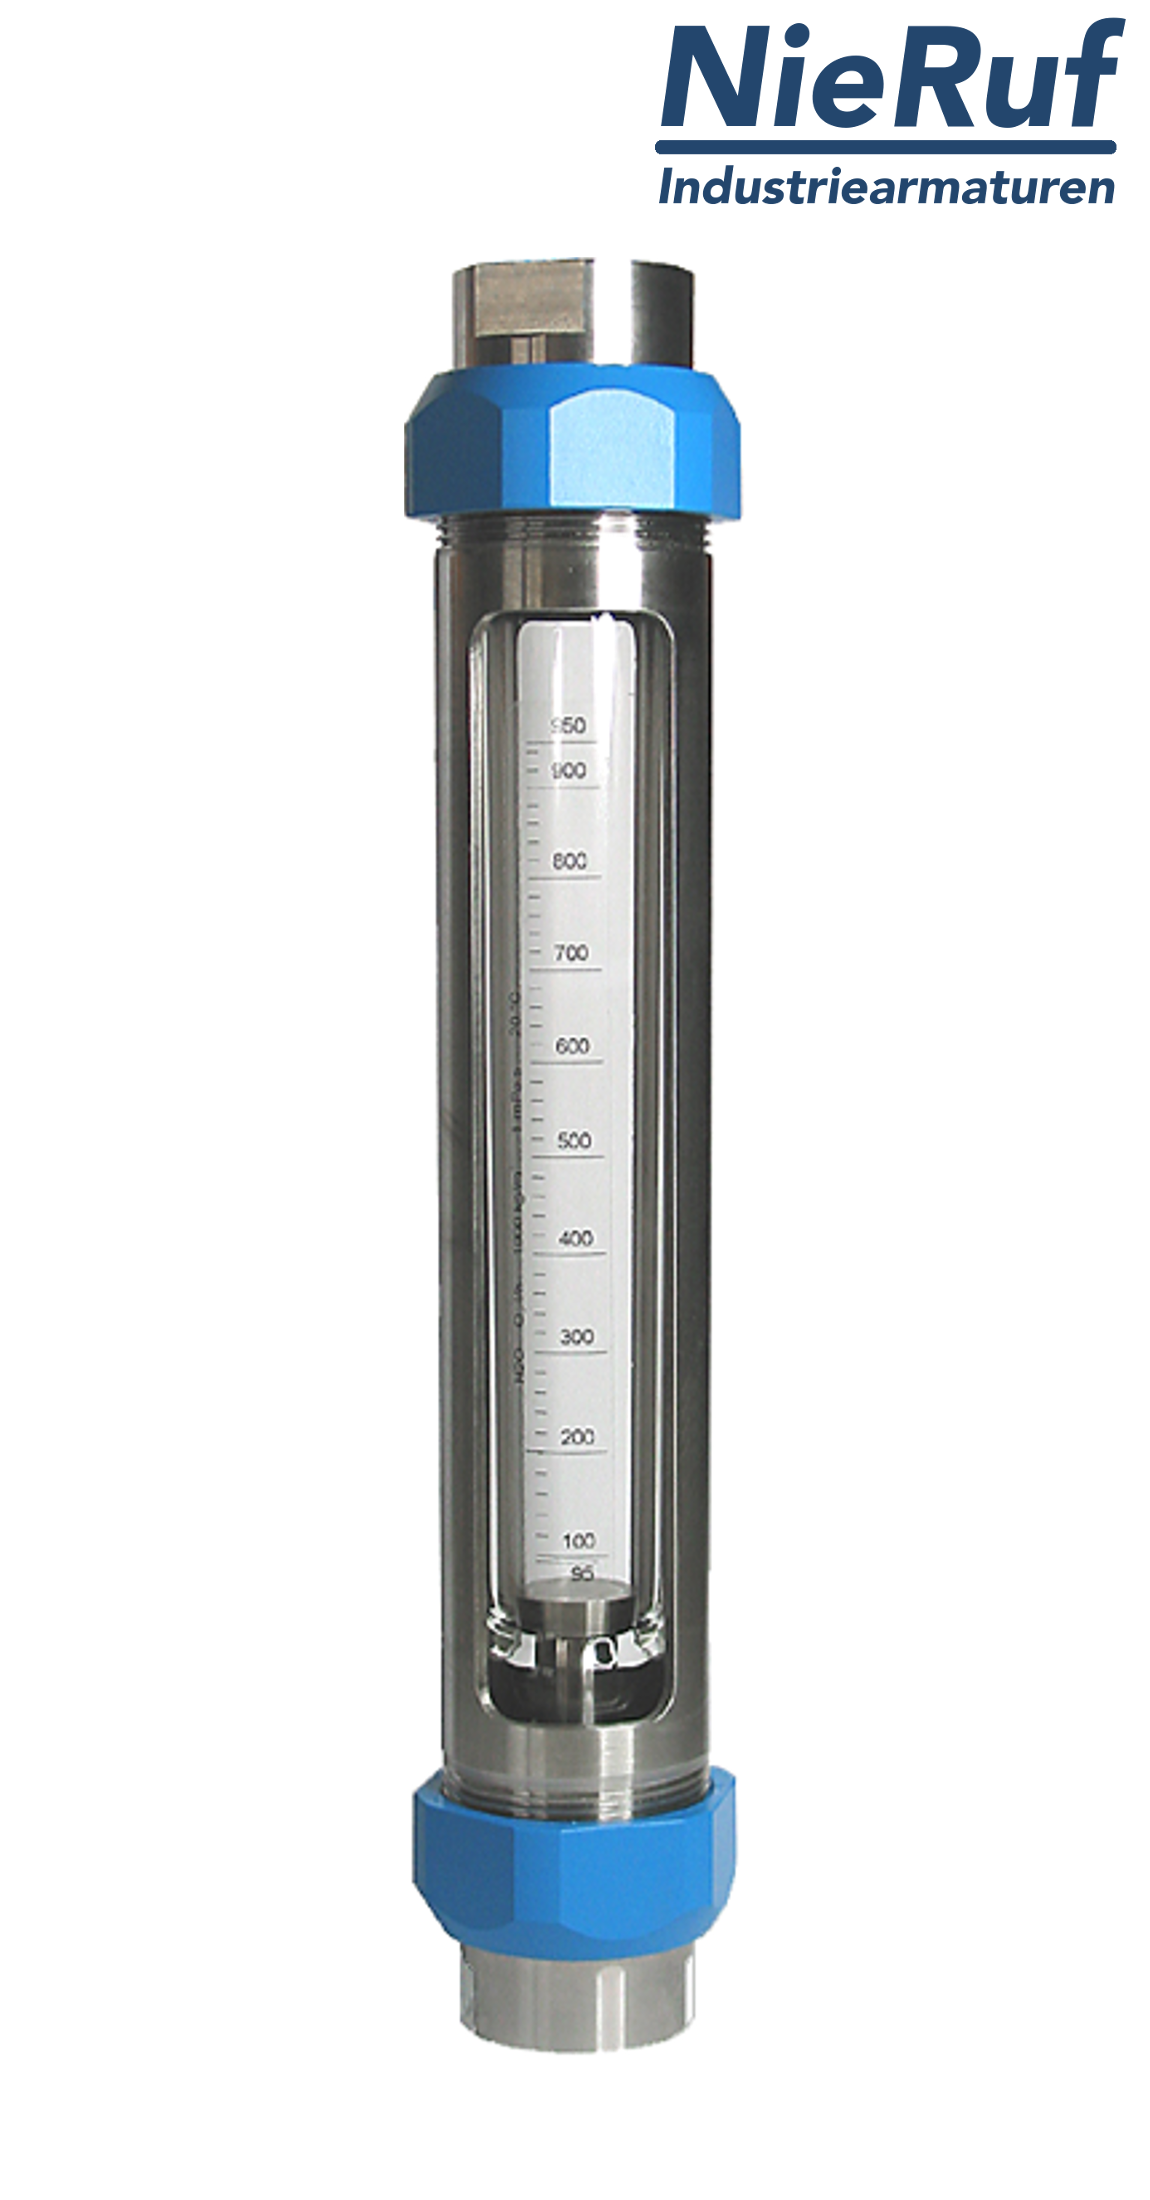 Variable area flowmeter stainless steel + borosilicate 1/2" inch 80.0 - 800 l/h water EPDM